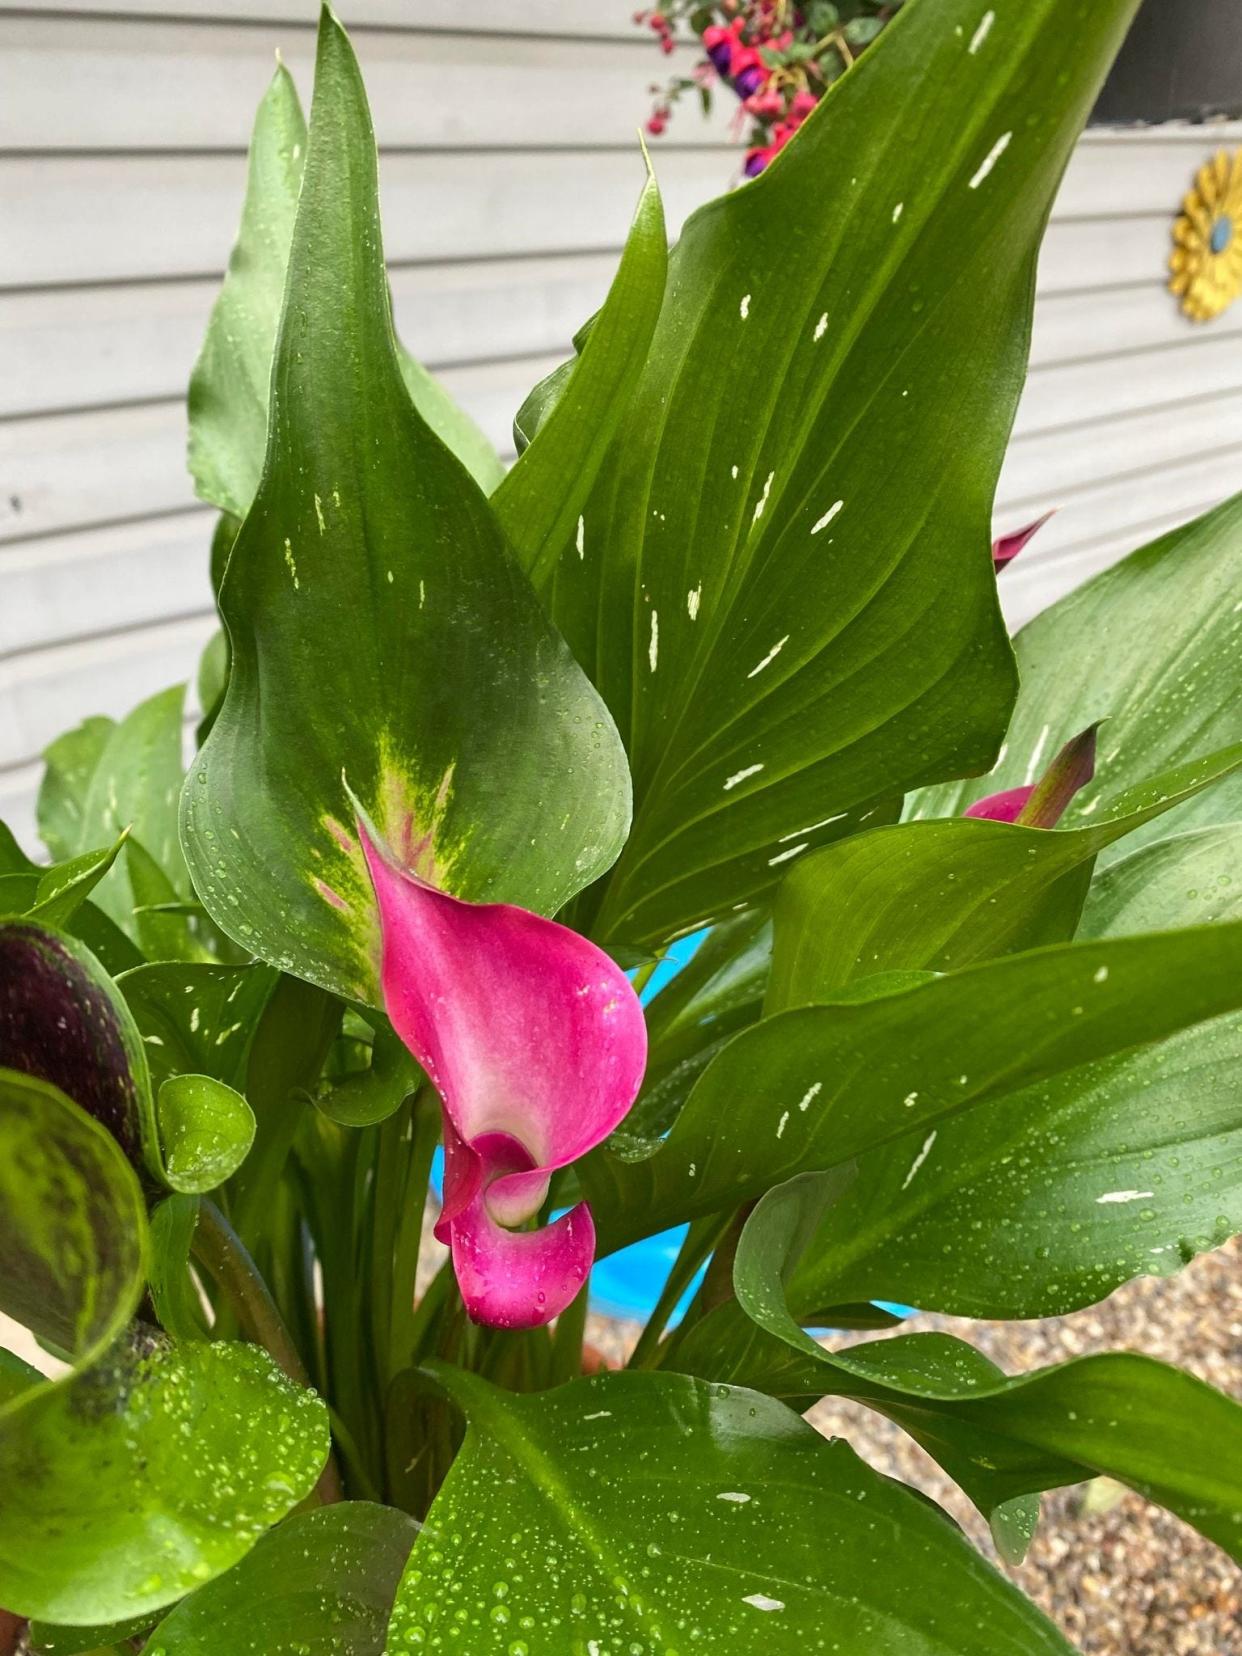 Calla lilies can be grown indoors or outdoors. When planting outside, make sure it's after the last frost and the soil is at least 65 degrees. They grow well in full sun or partial shade.